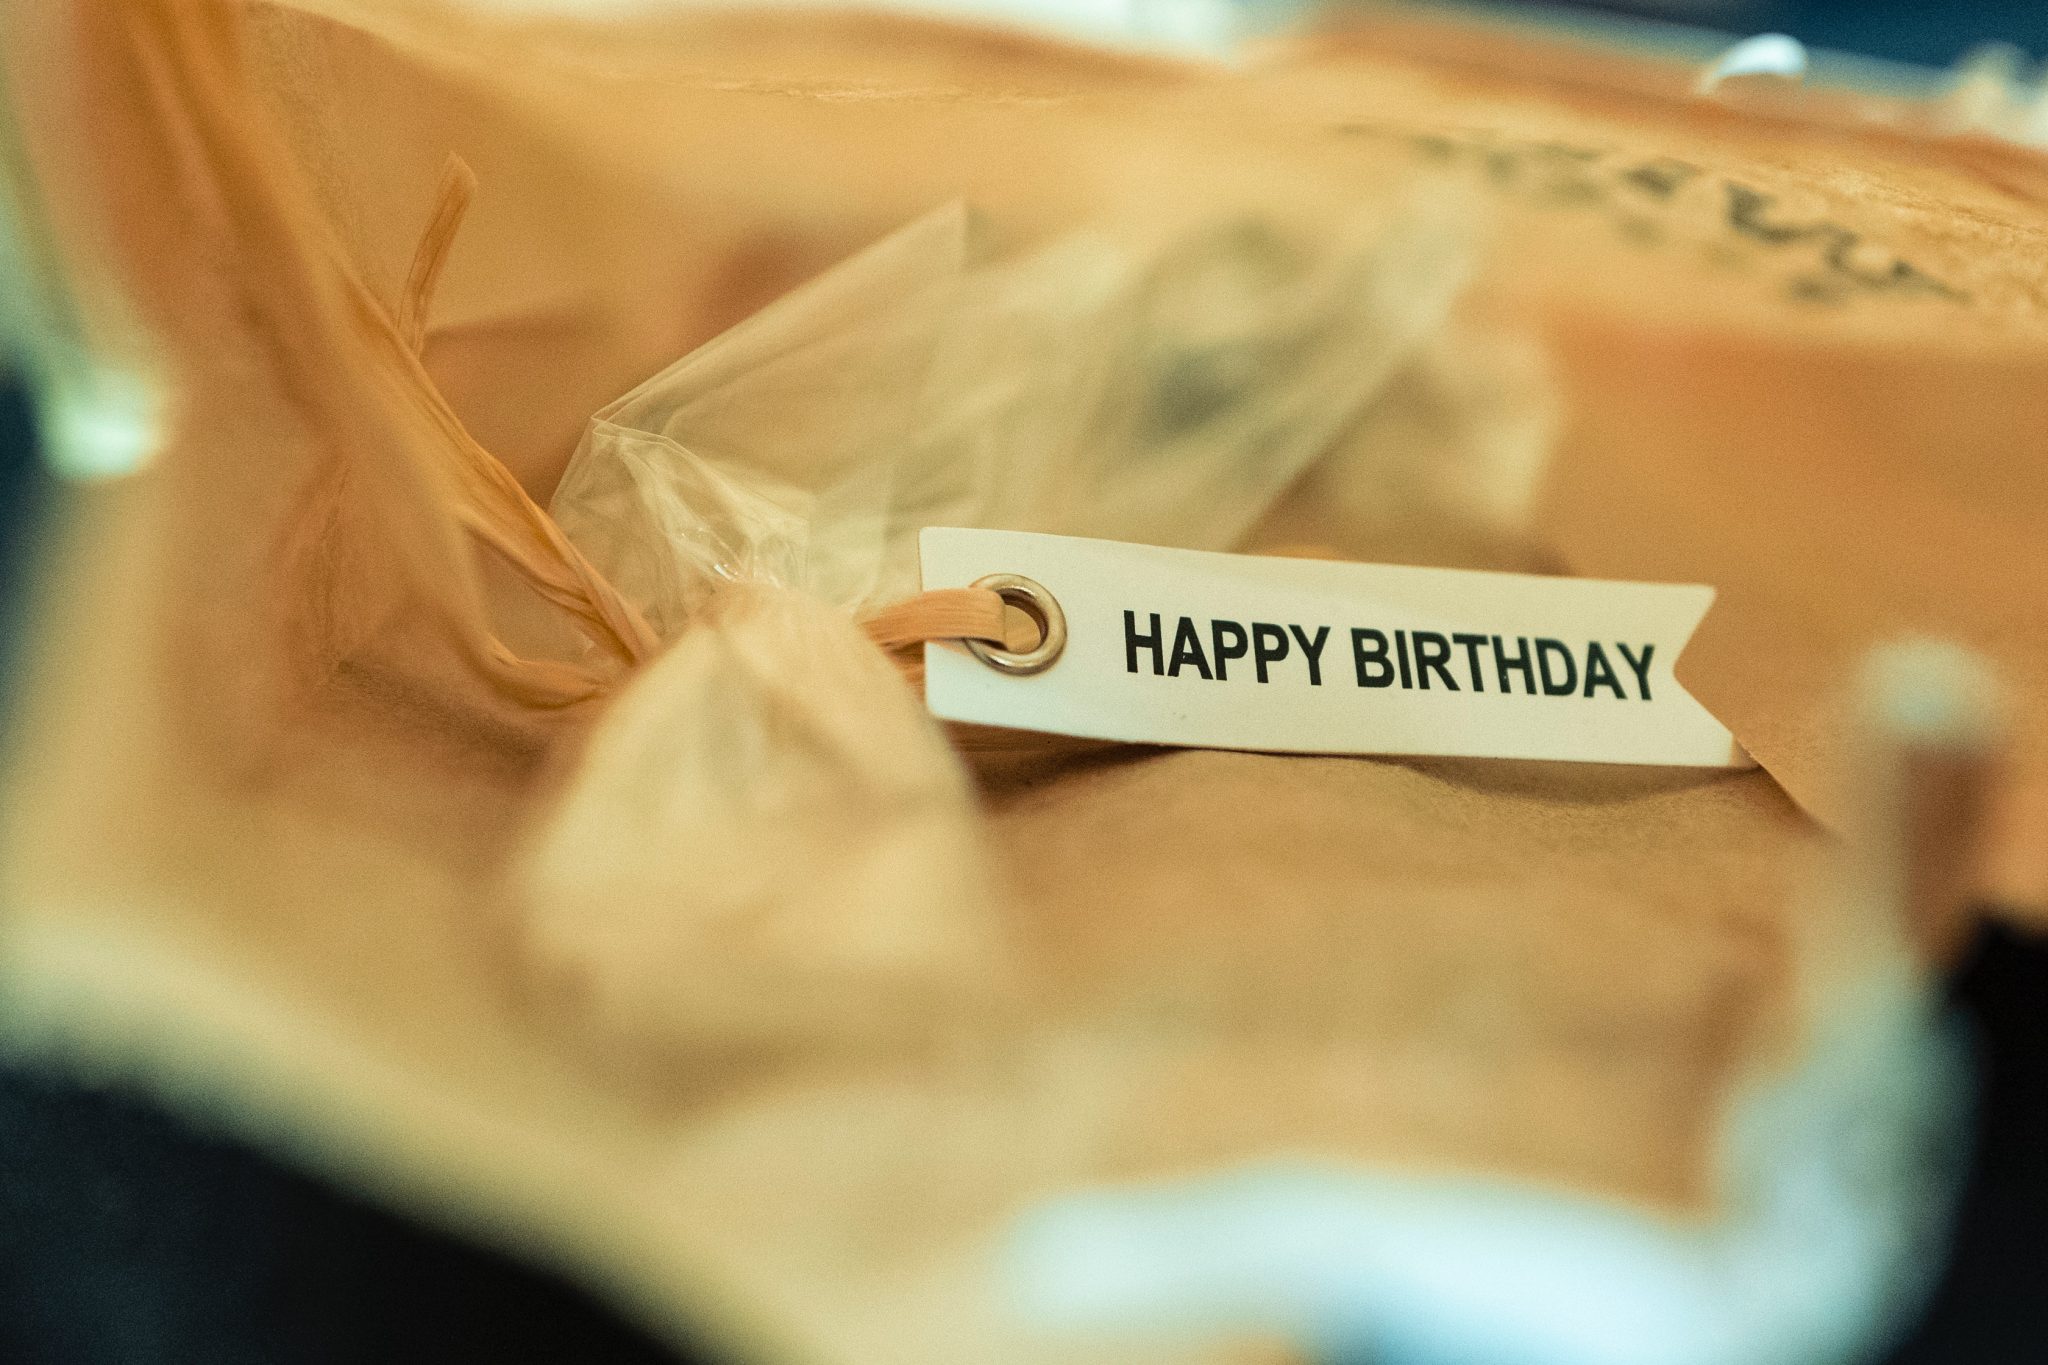 Awesome Birthday Gift Ideas for Coworkers